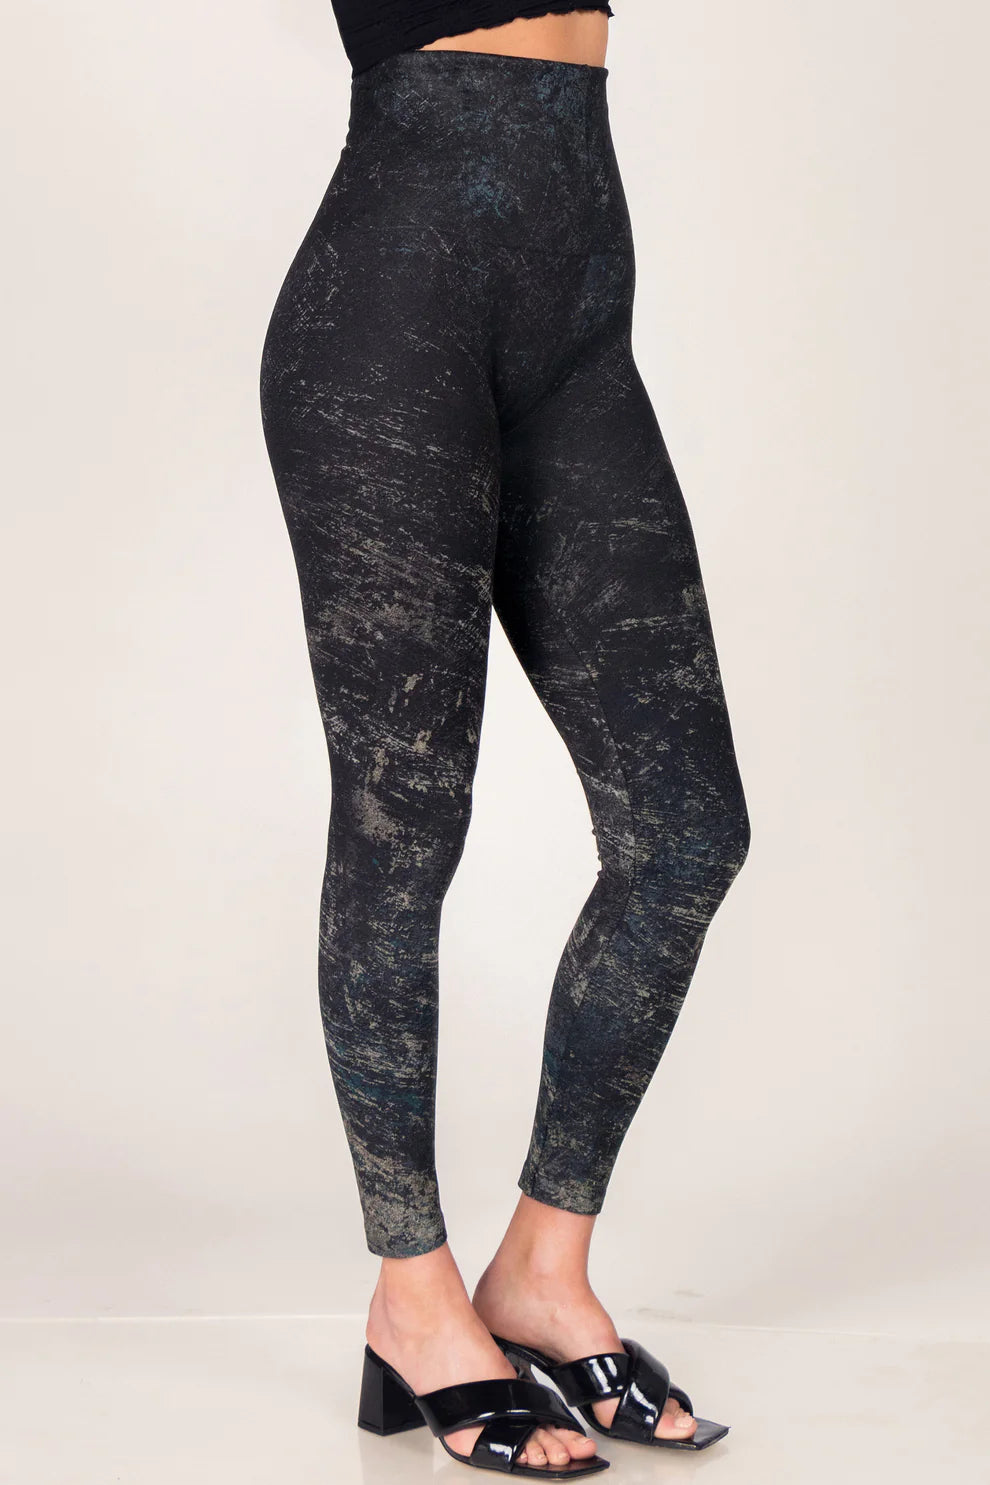 High Quality Lycra Fabric Offline Yoga Pants For Women Solid Color, Shaping  Waist, Elastic Tight Fit, Ideal For Sports, Jogging, And Fitness Aligning  Leggings From Lulu5566, $11.84